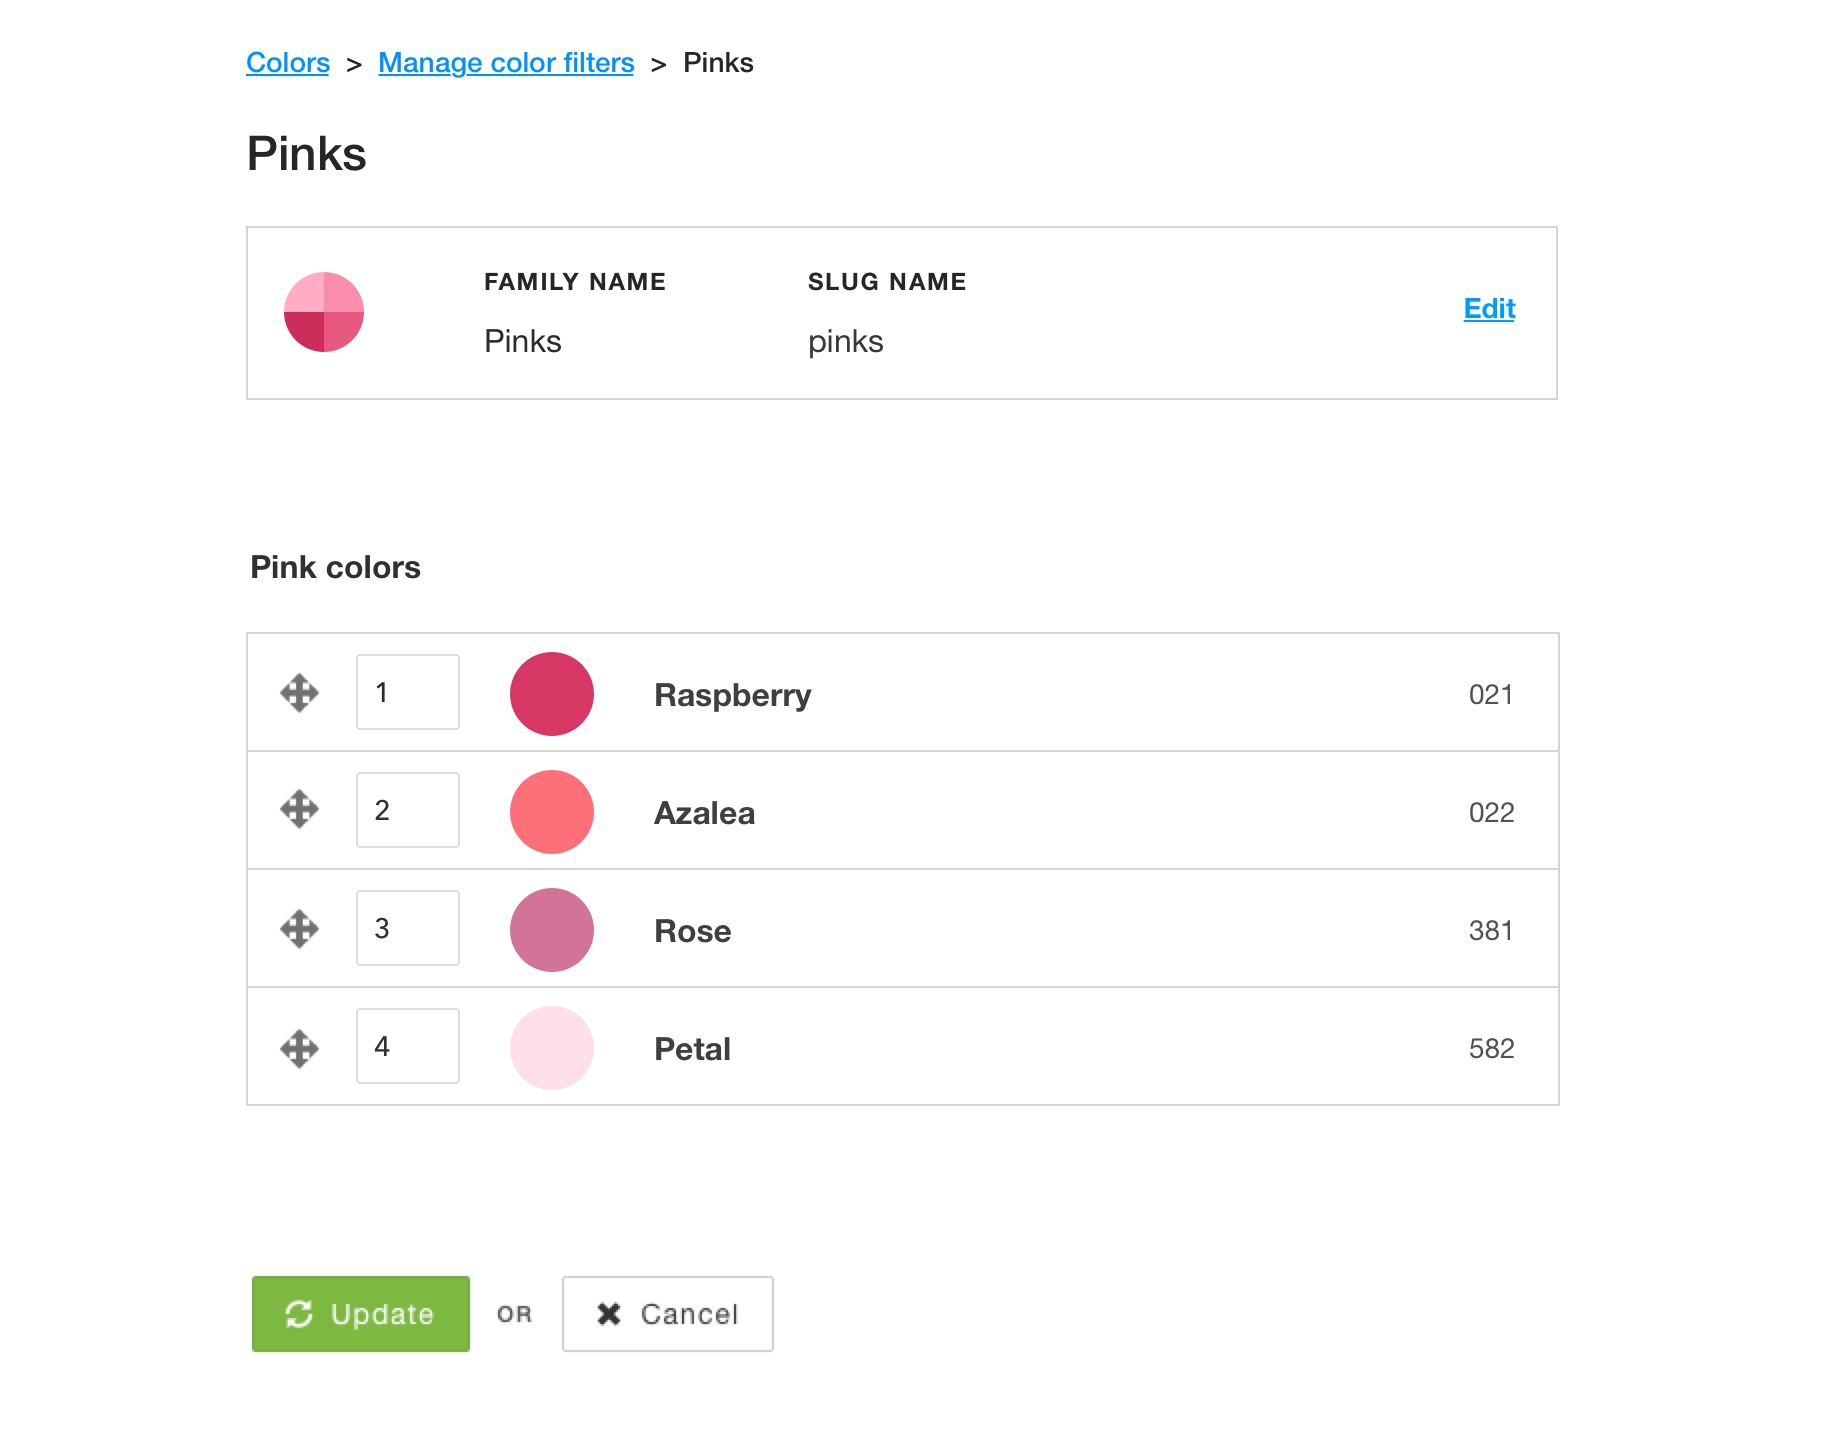 Screenshot of the pink color family editor